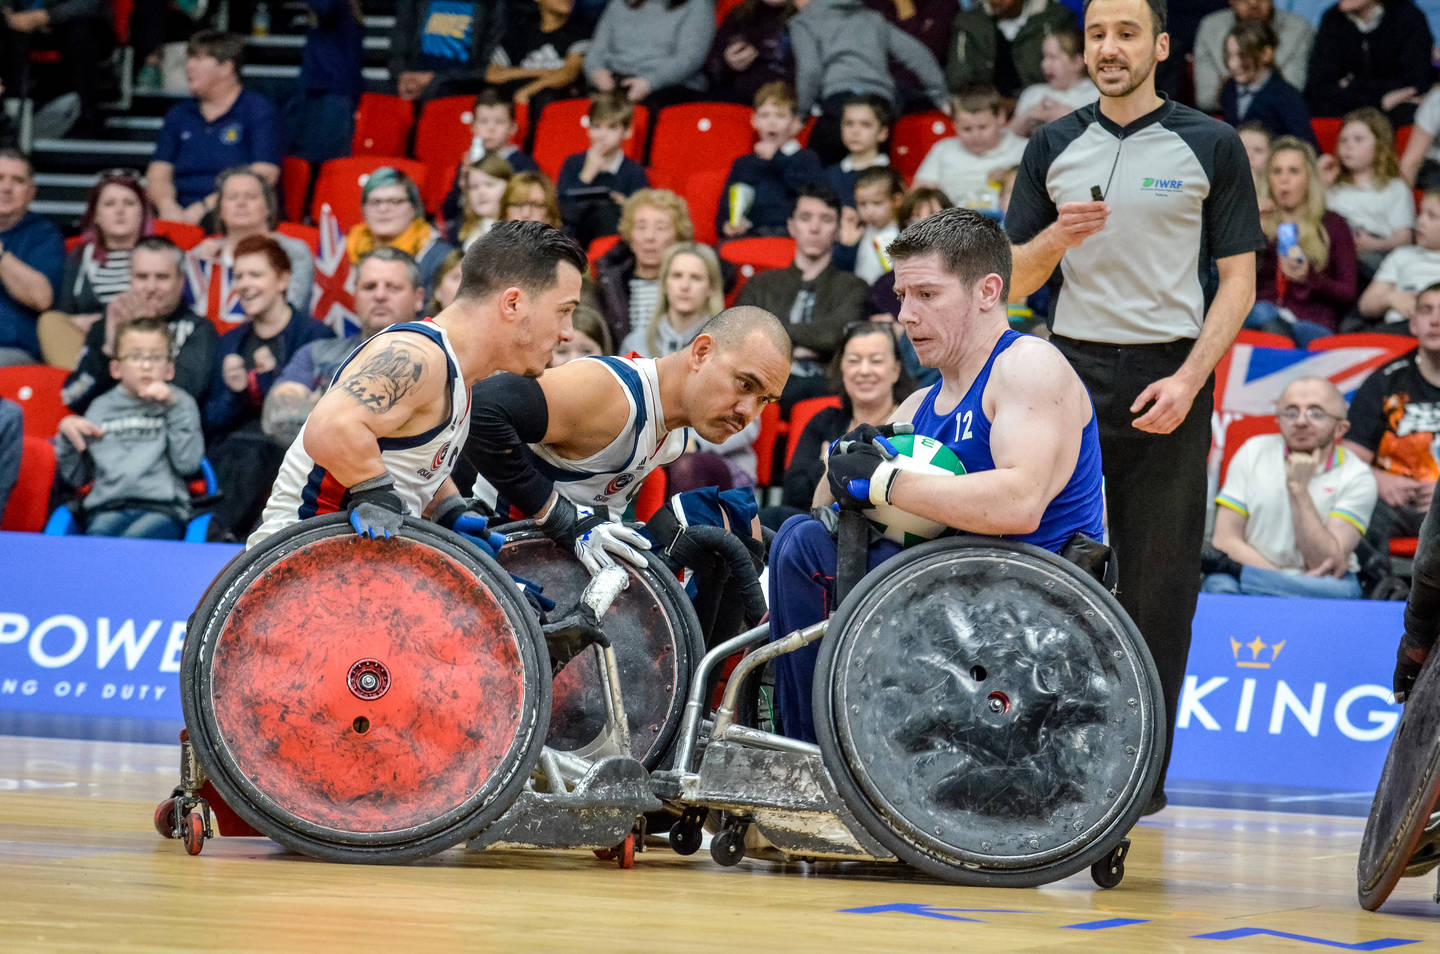 Wheelchair rugby players on court in match at Quad Nations tournament 